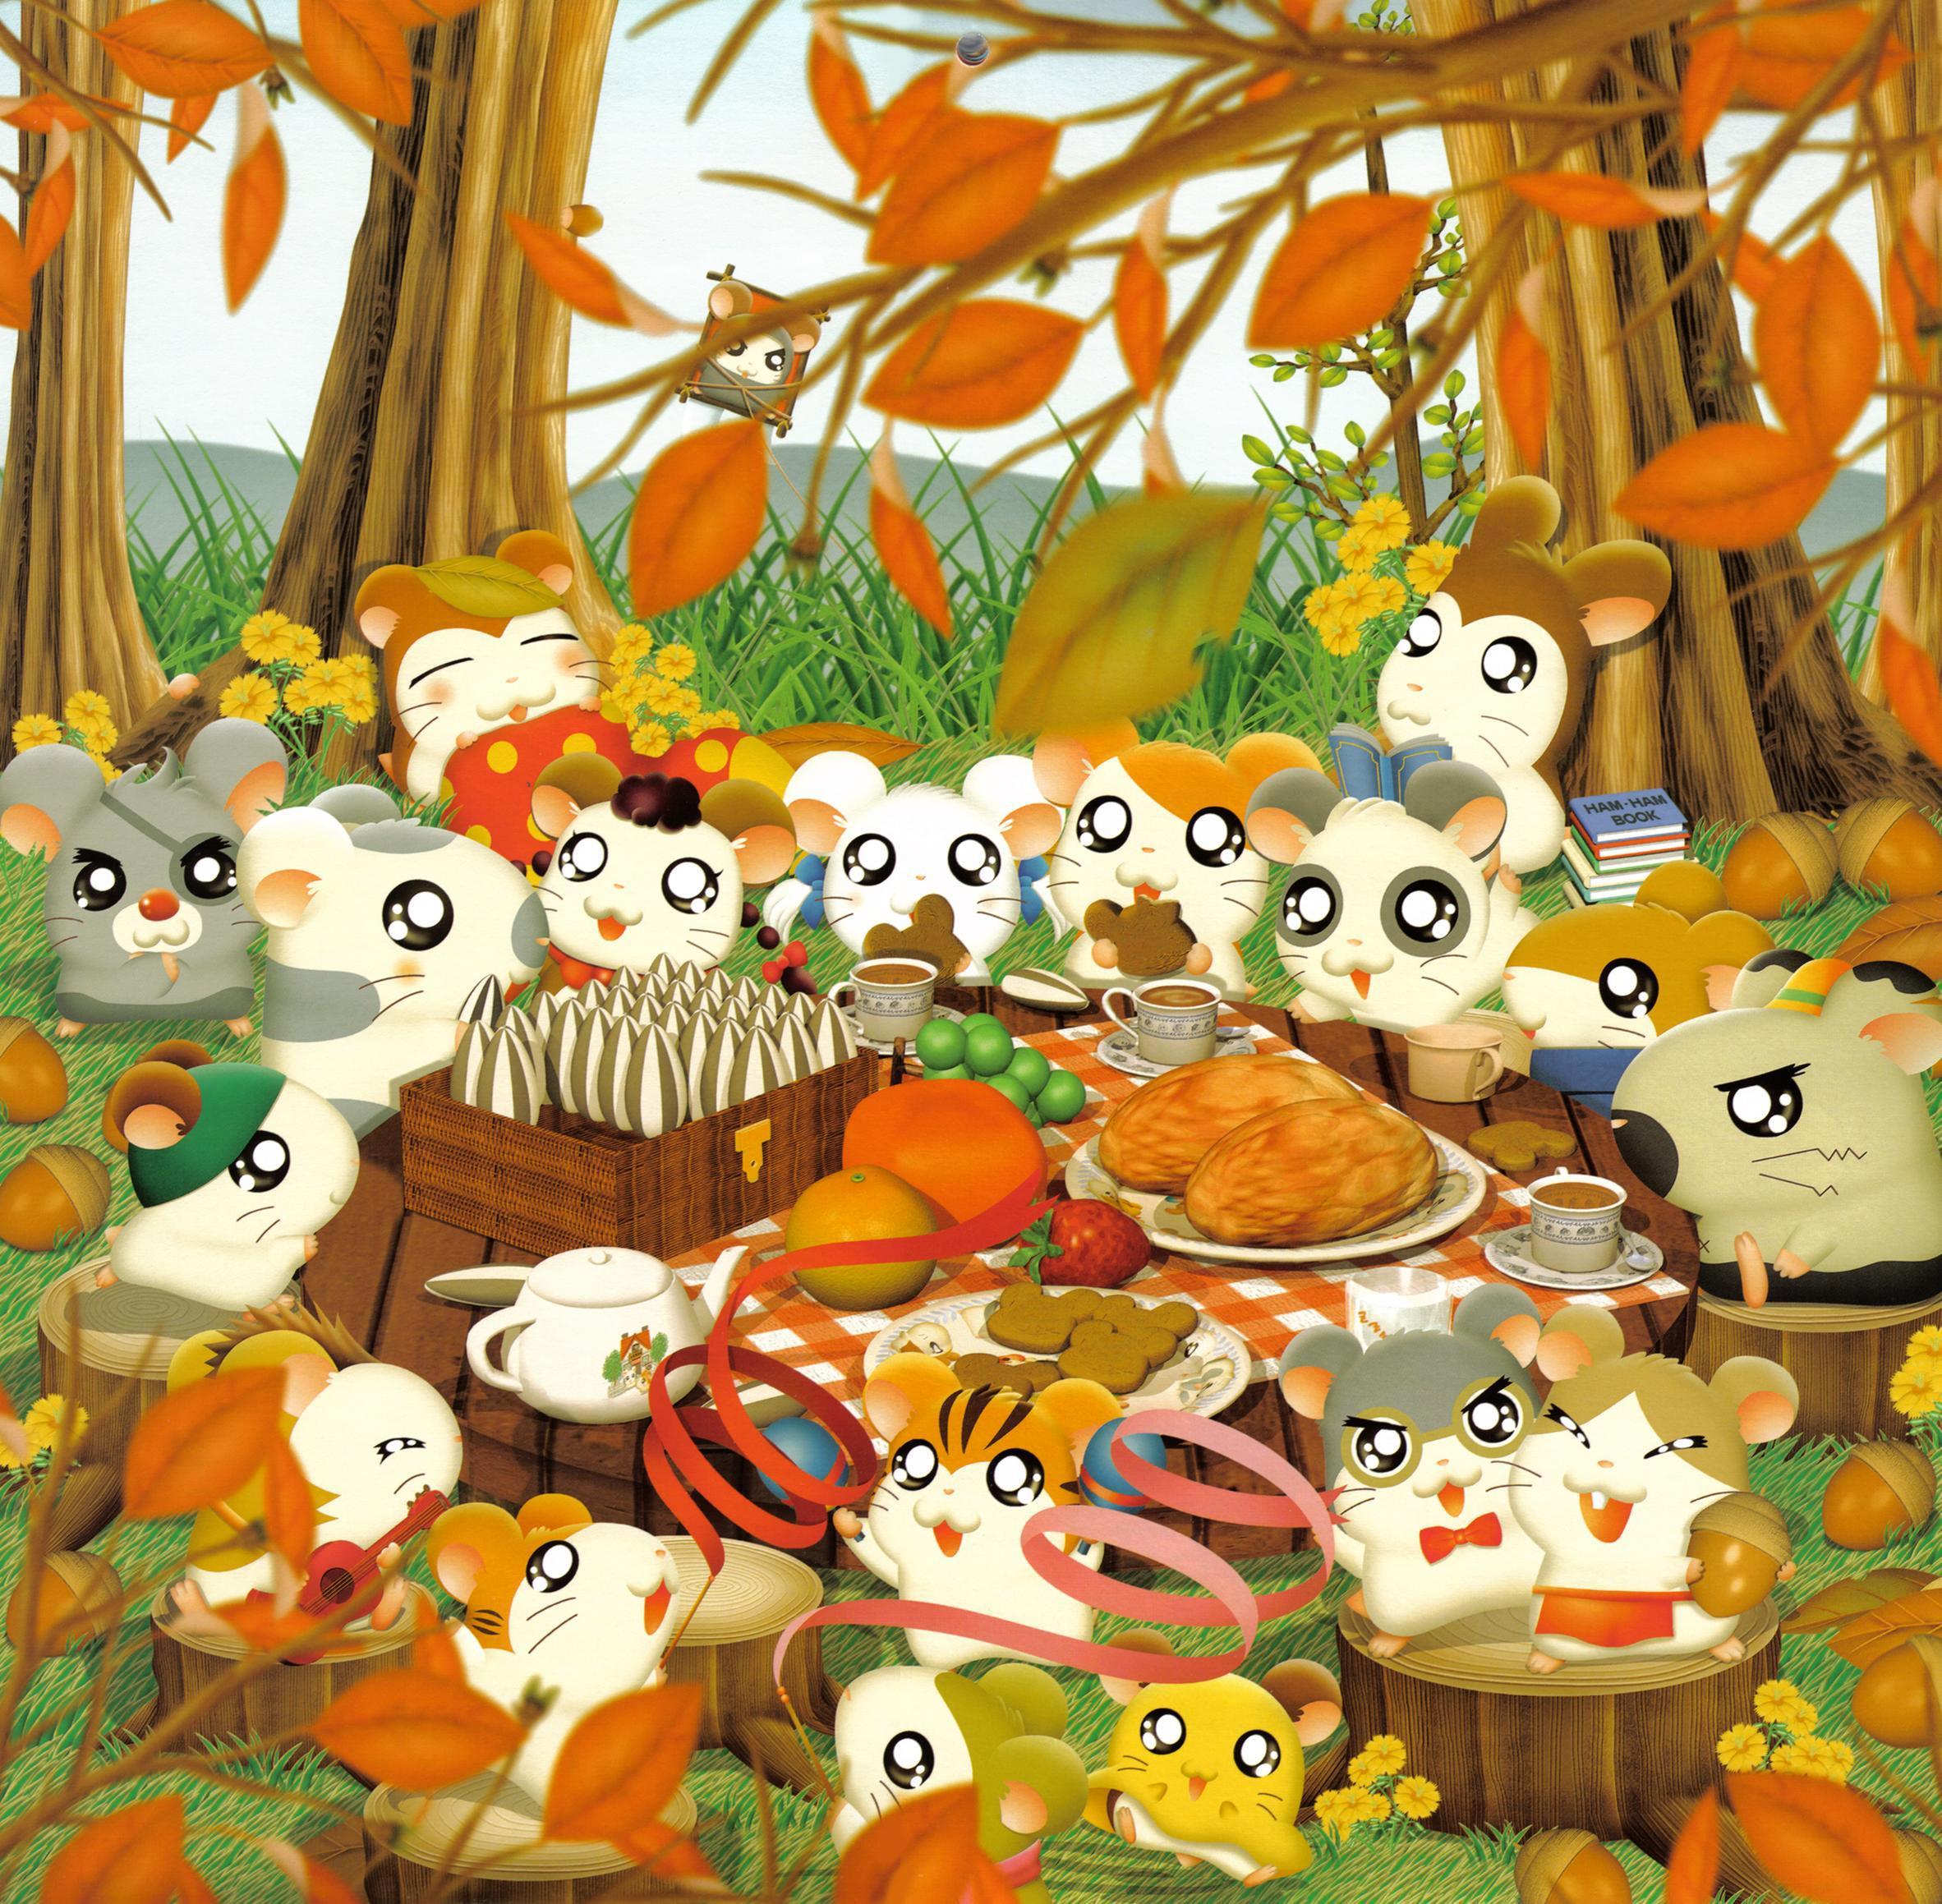 Hamtaro (Character) and Scan Gallery